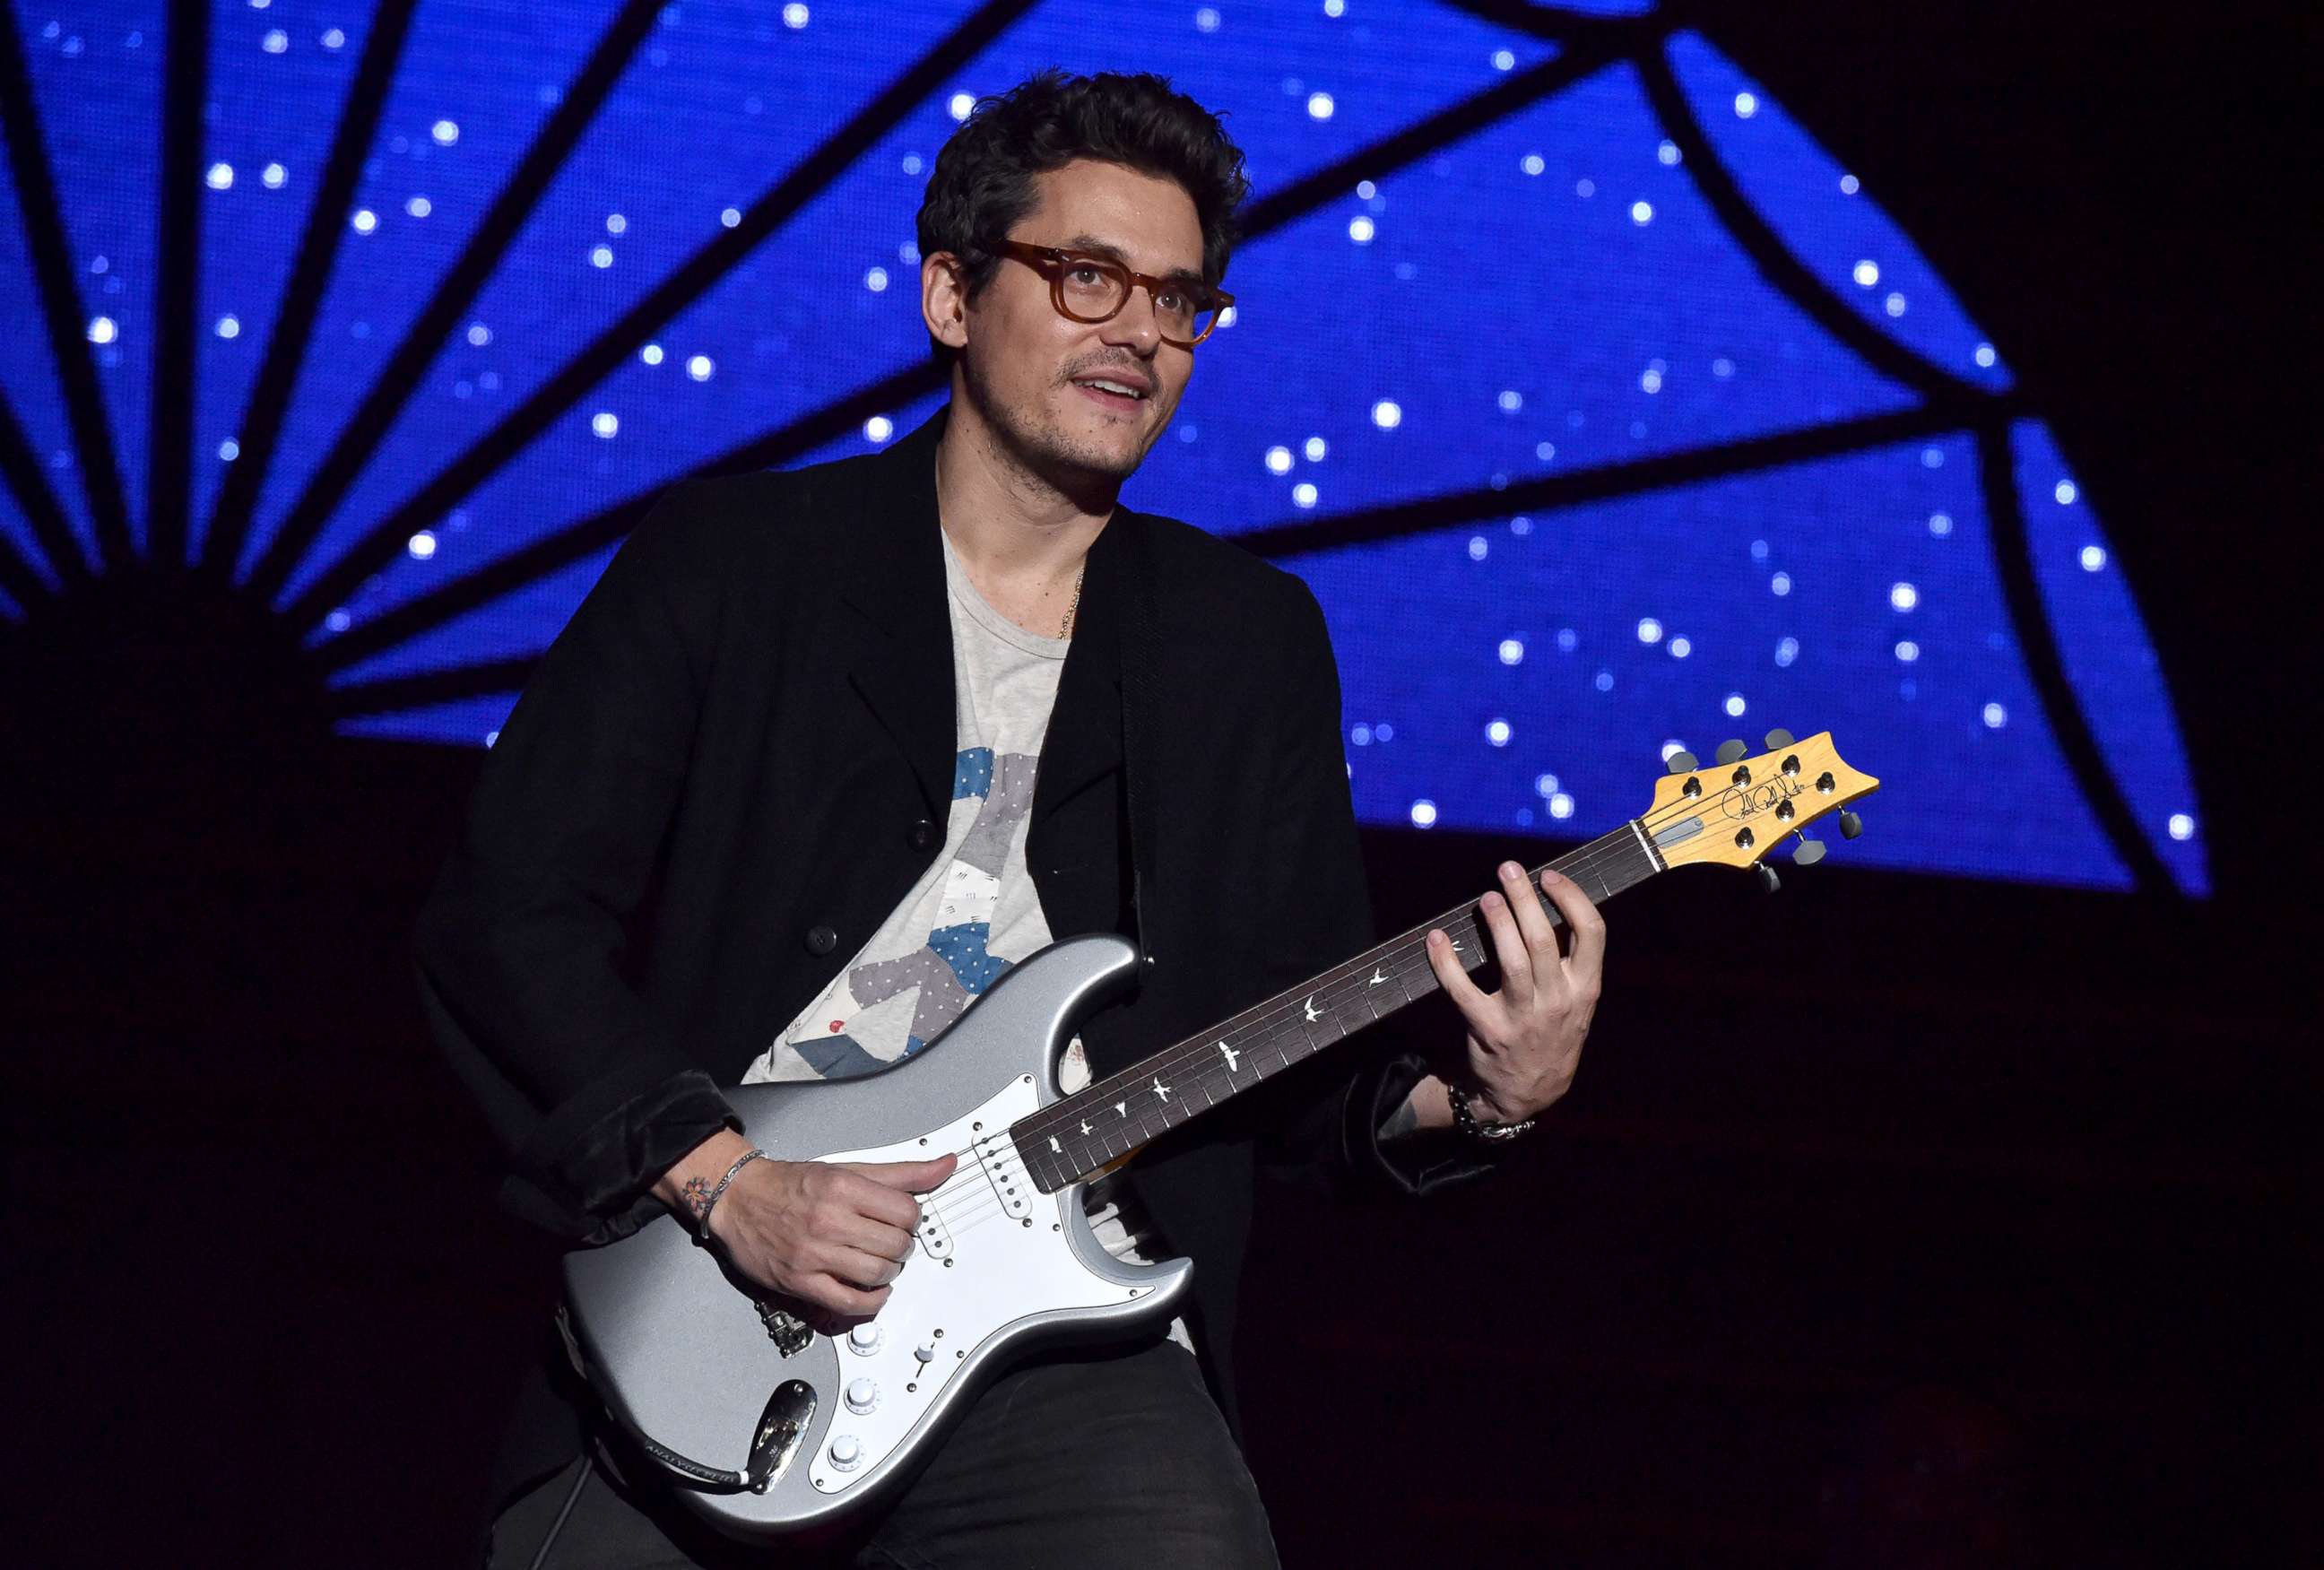 PHOTO: John Mayer performs at The Forum on Dec. 31, 2017 in Inglewood, Calif.